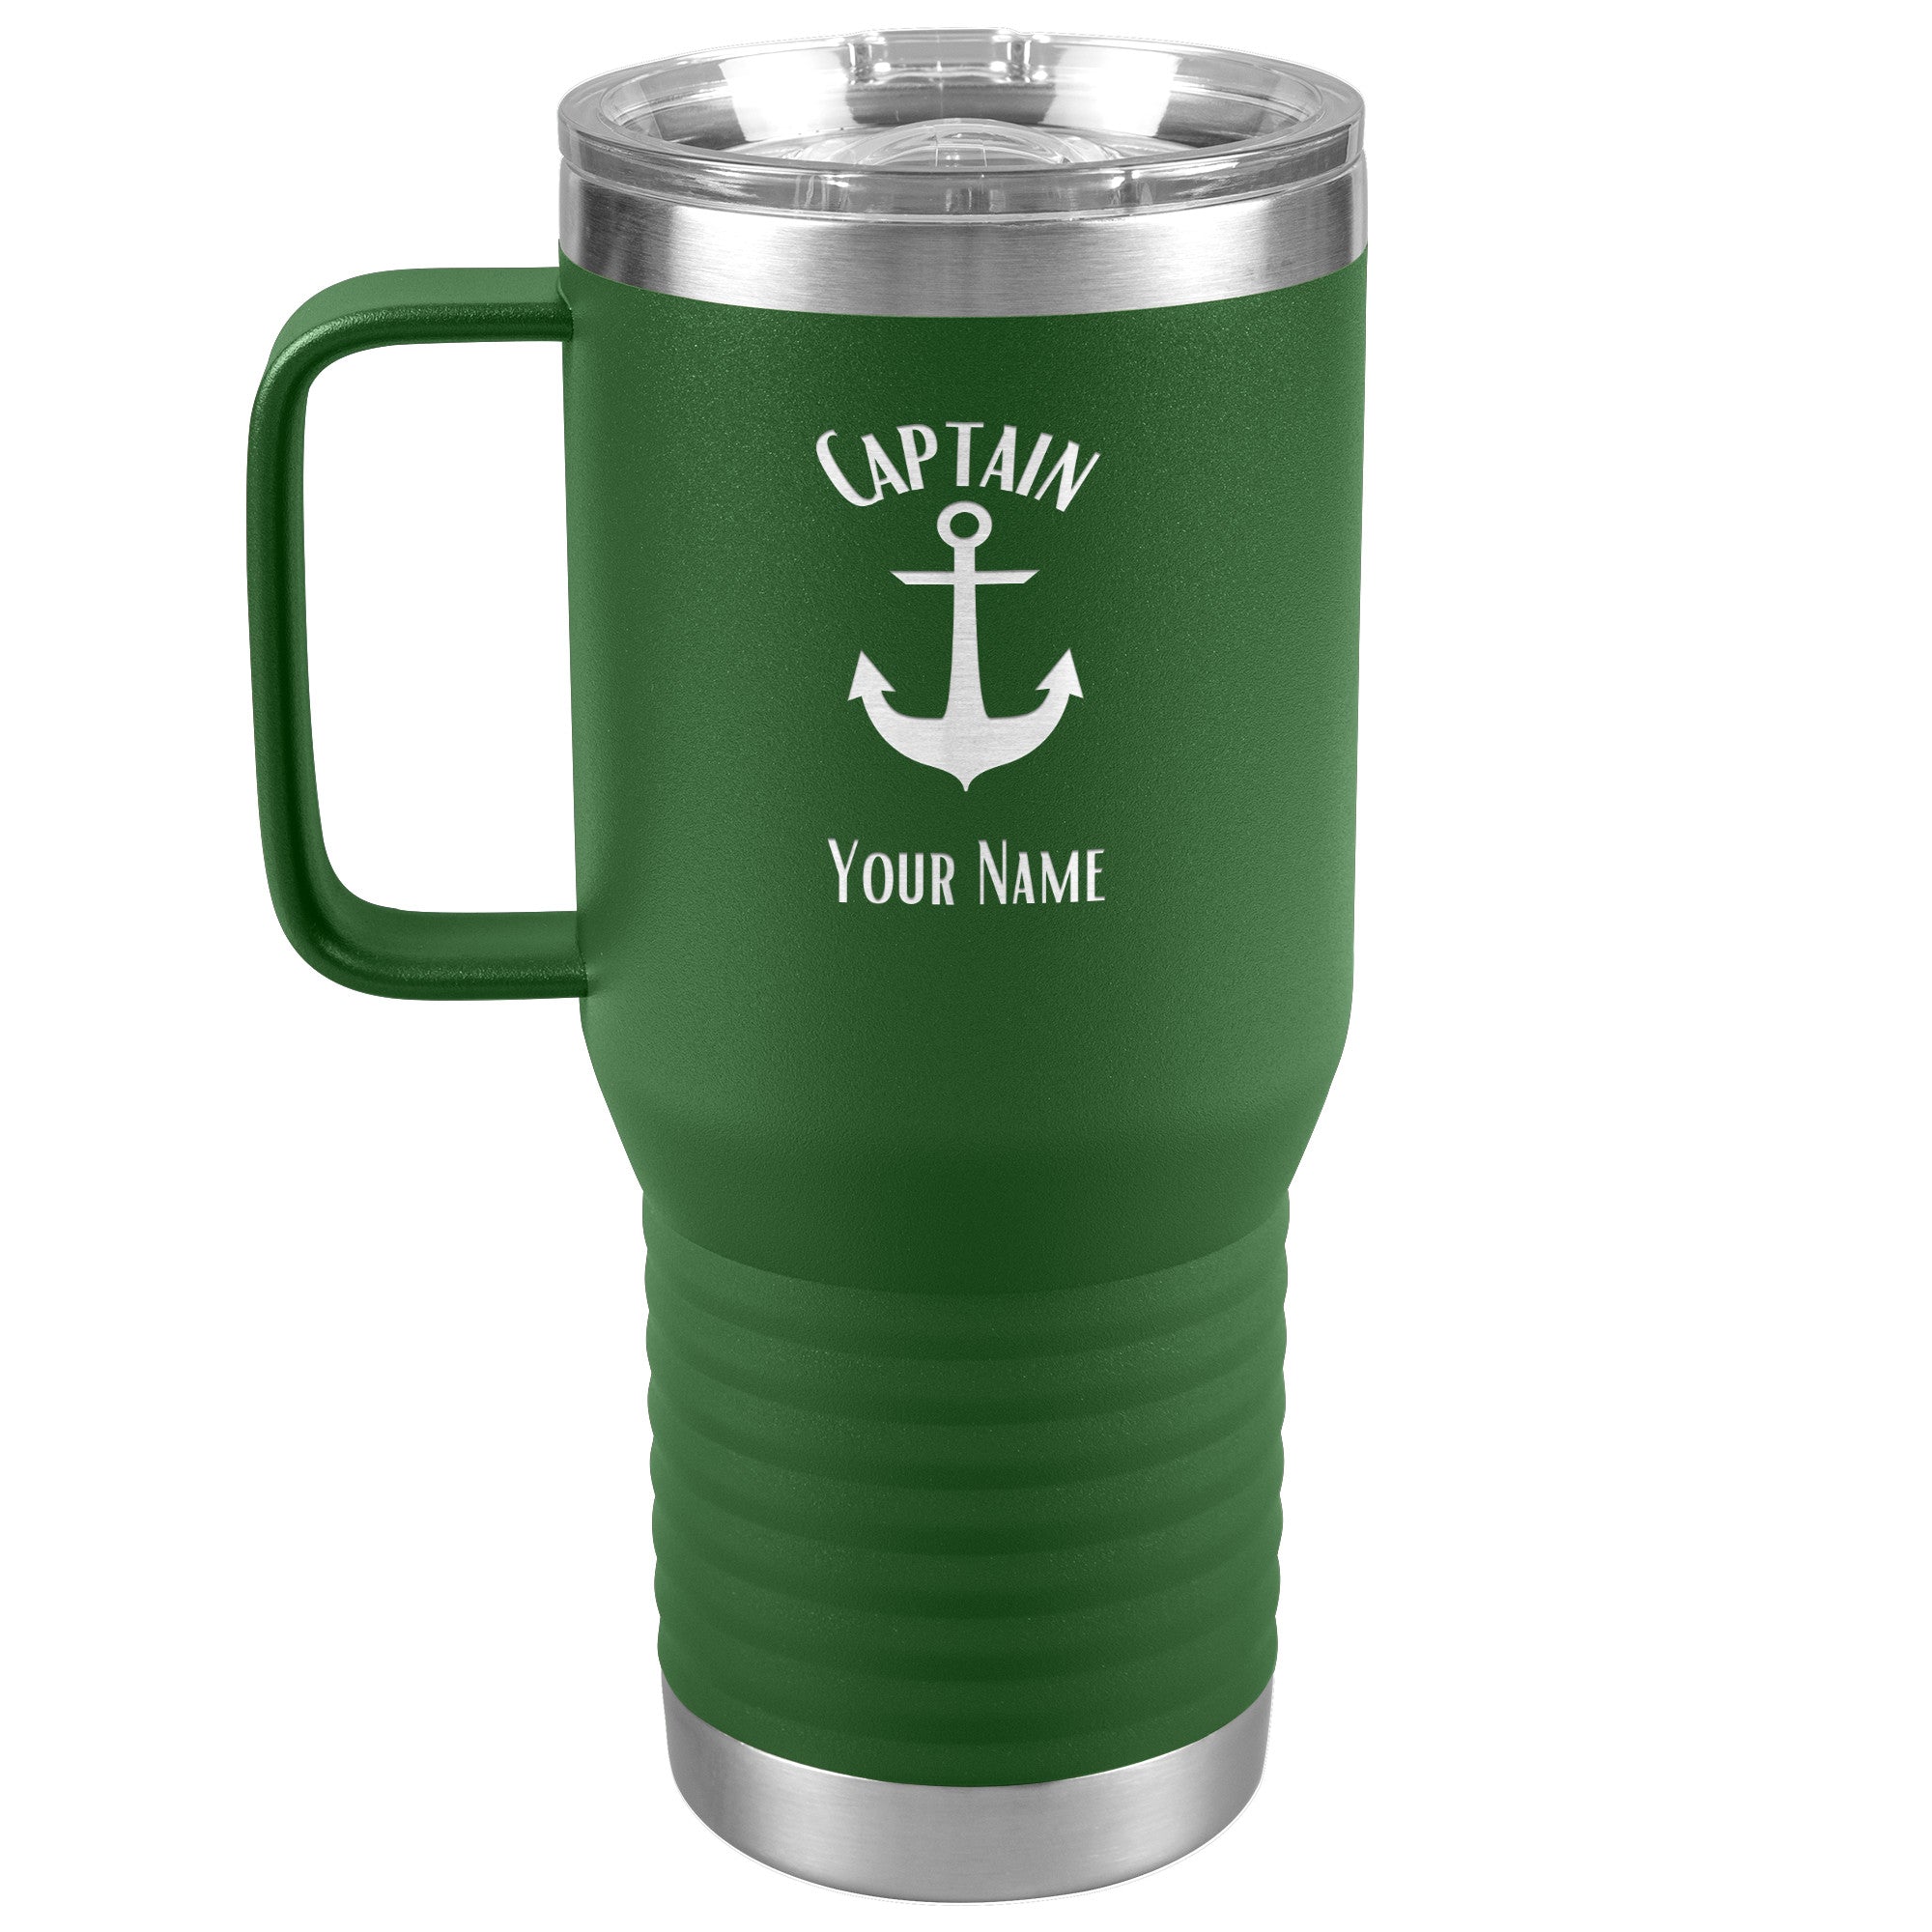 Boat Gifts, Nautical Gifts, Boat Tumbler, Personalized, Boating